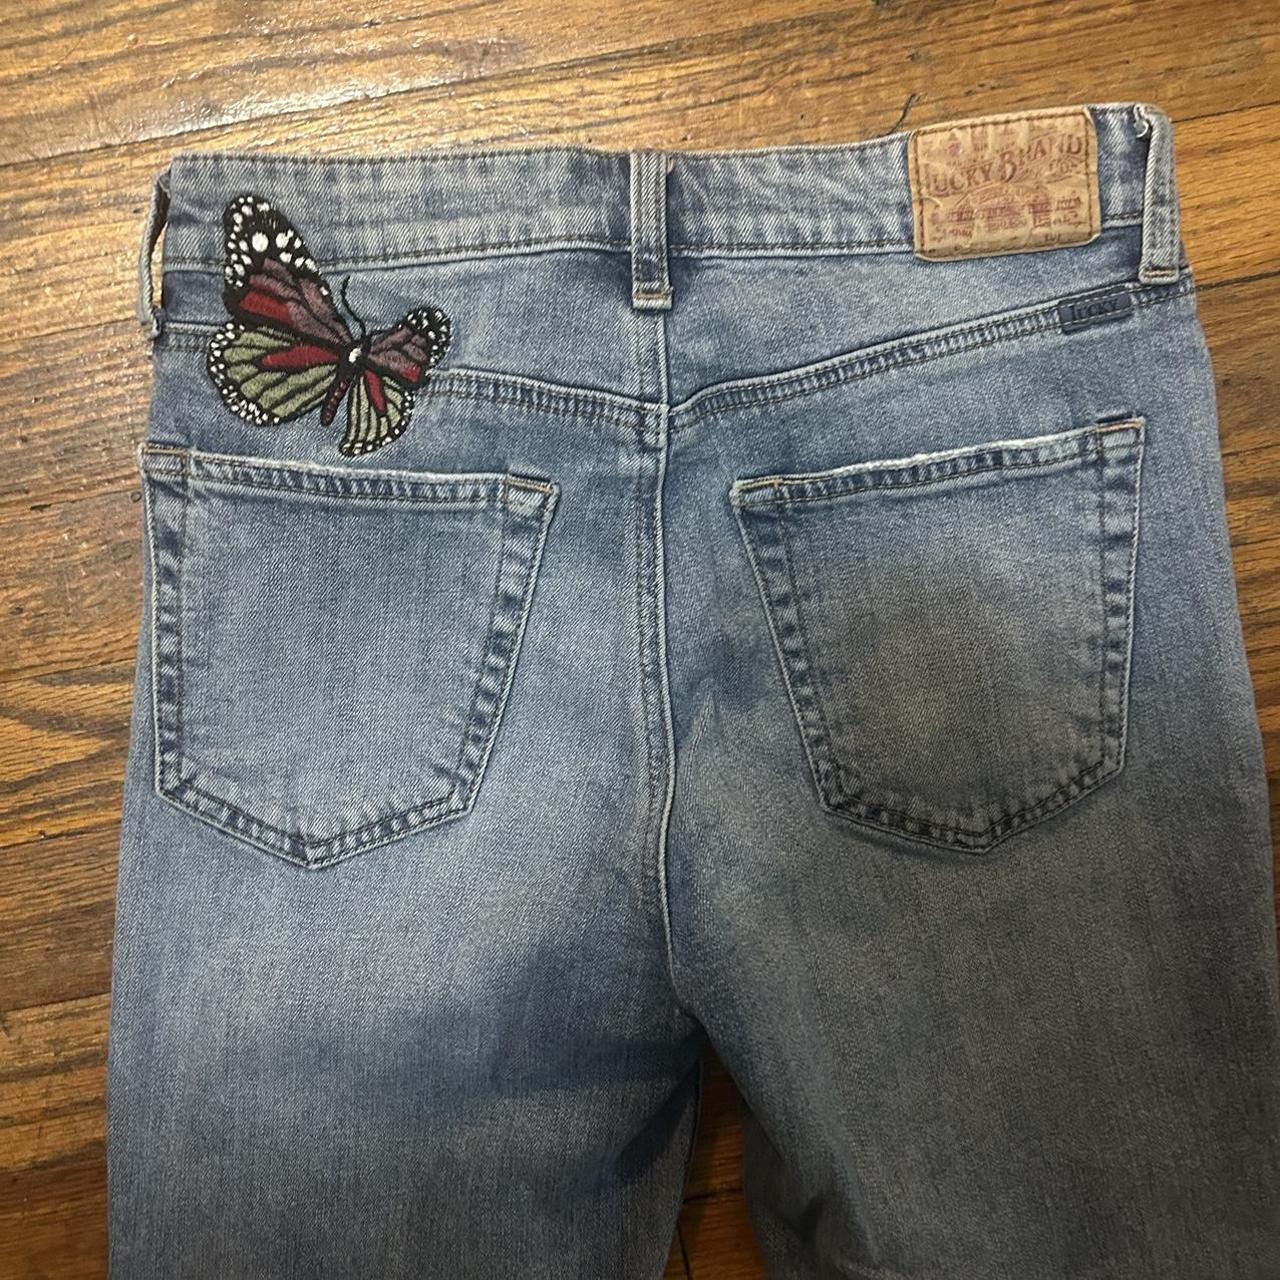 Lucky Brand butterfly embroidered jeans 🦋, Size 0/25”